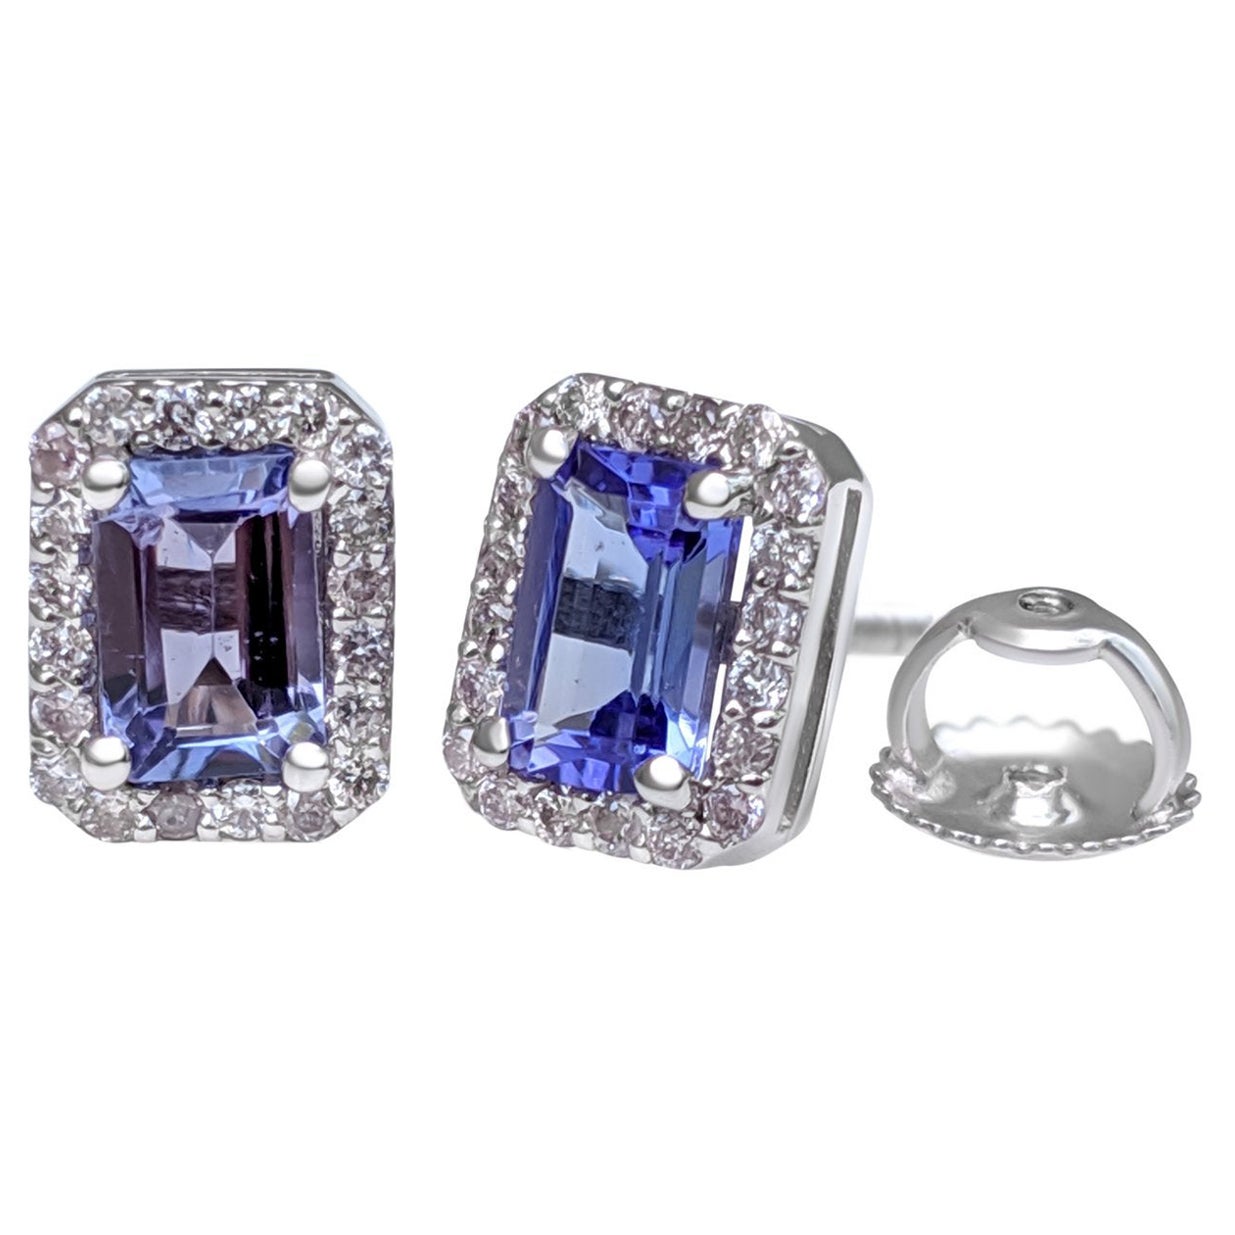 NO RESERVE! 1.04Ct Tanzanite and 0.20 Ct Diamonds 14 kt. White gold - Earrings For Sale